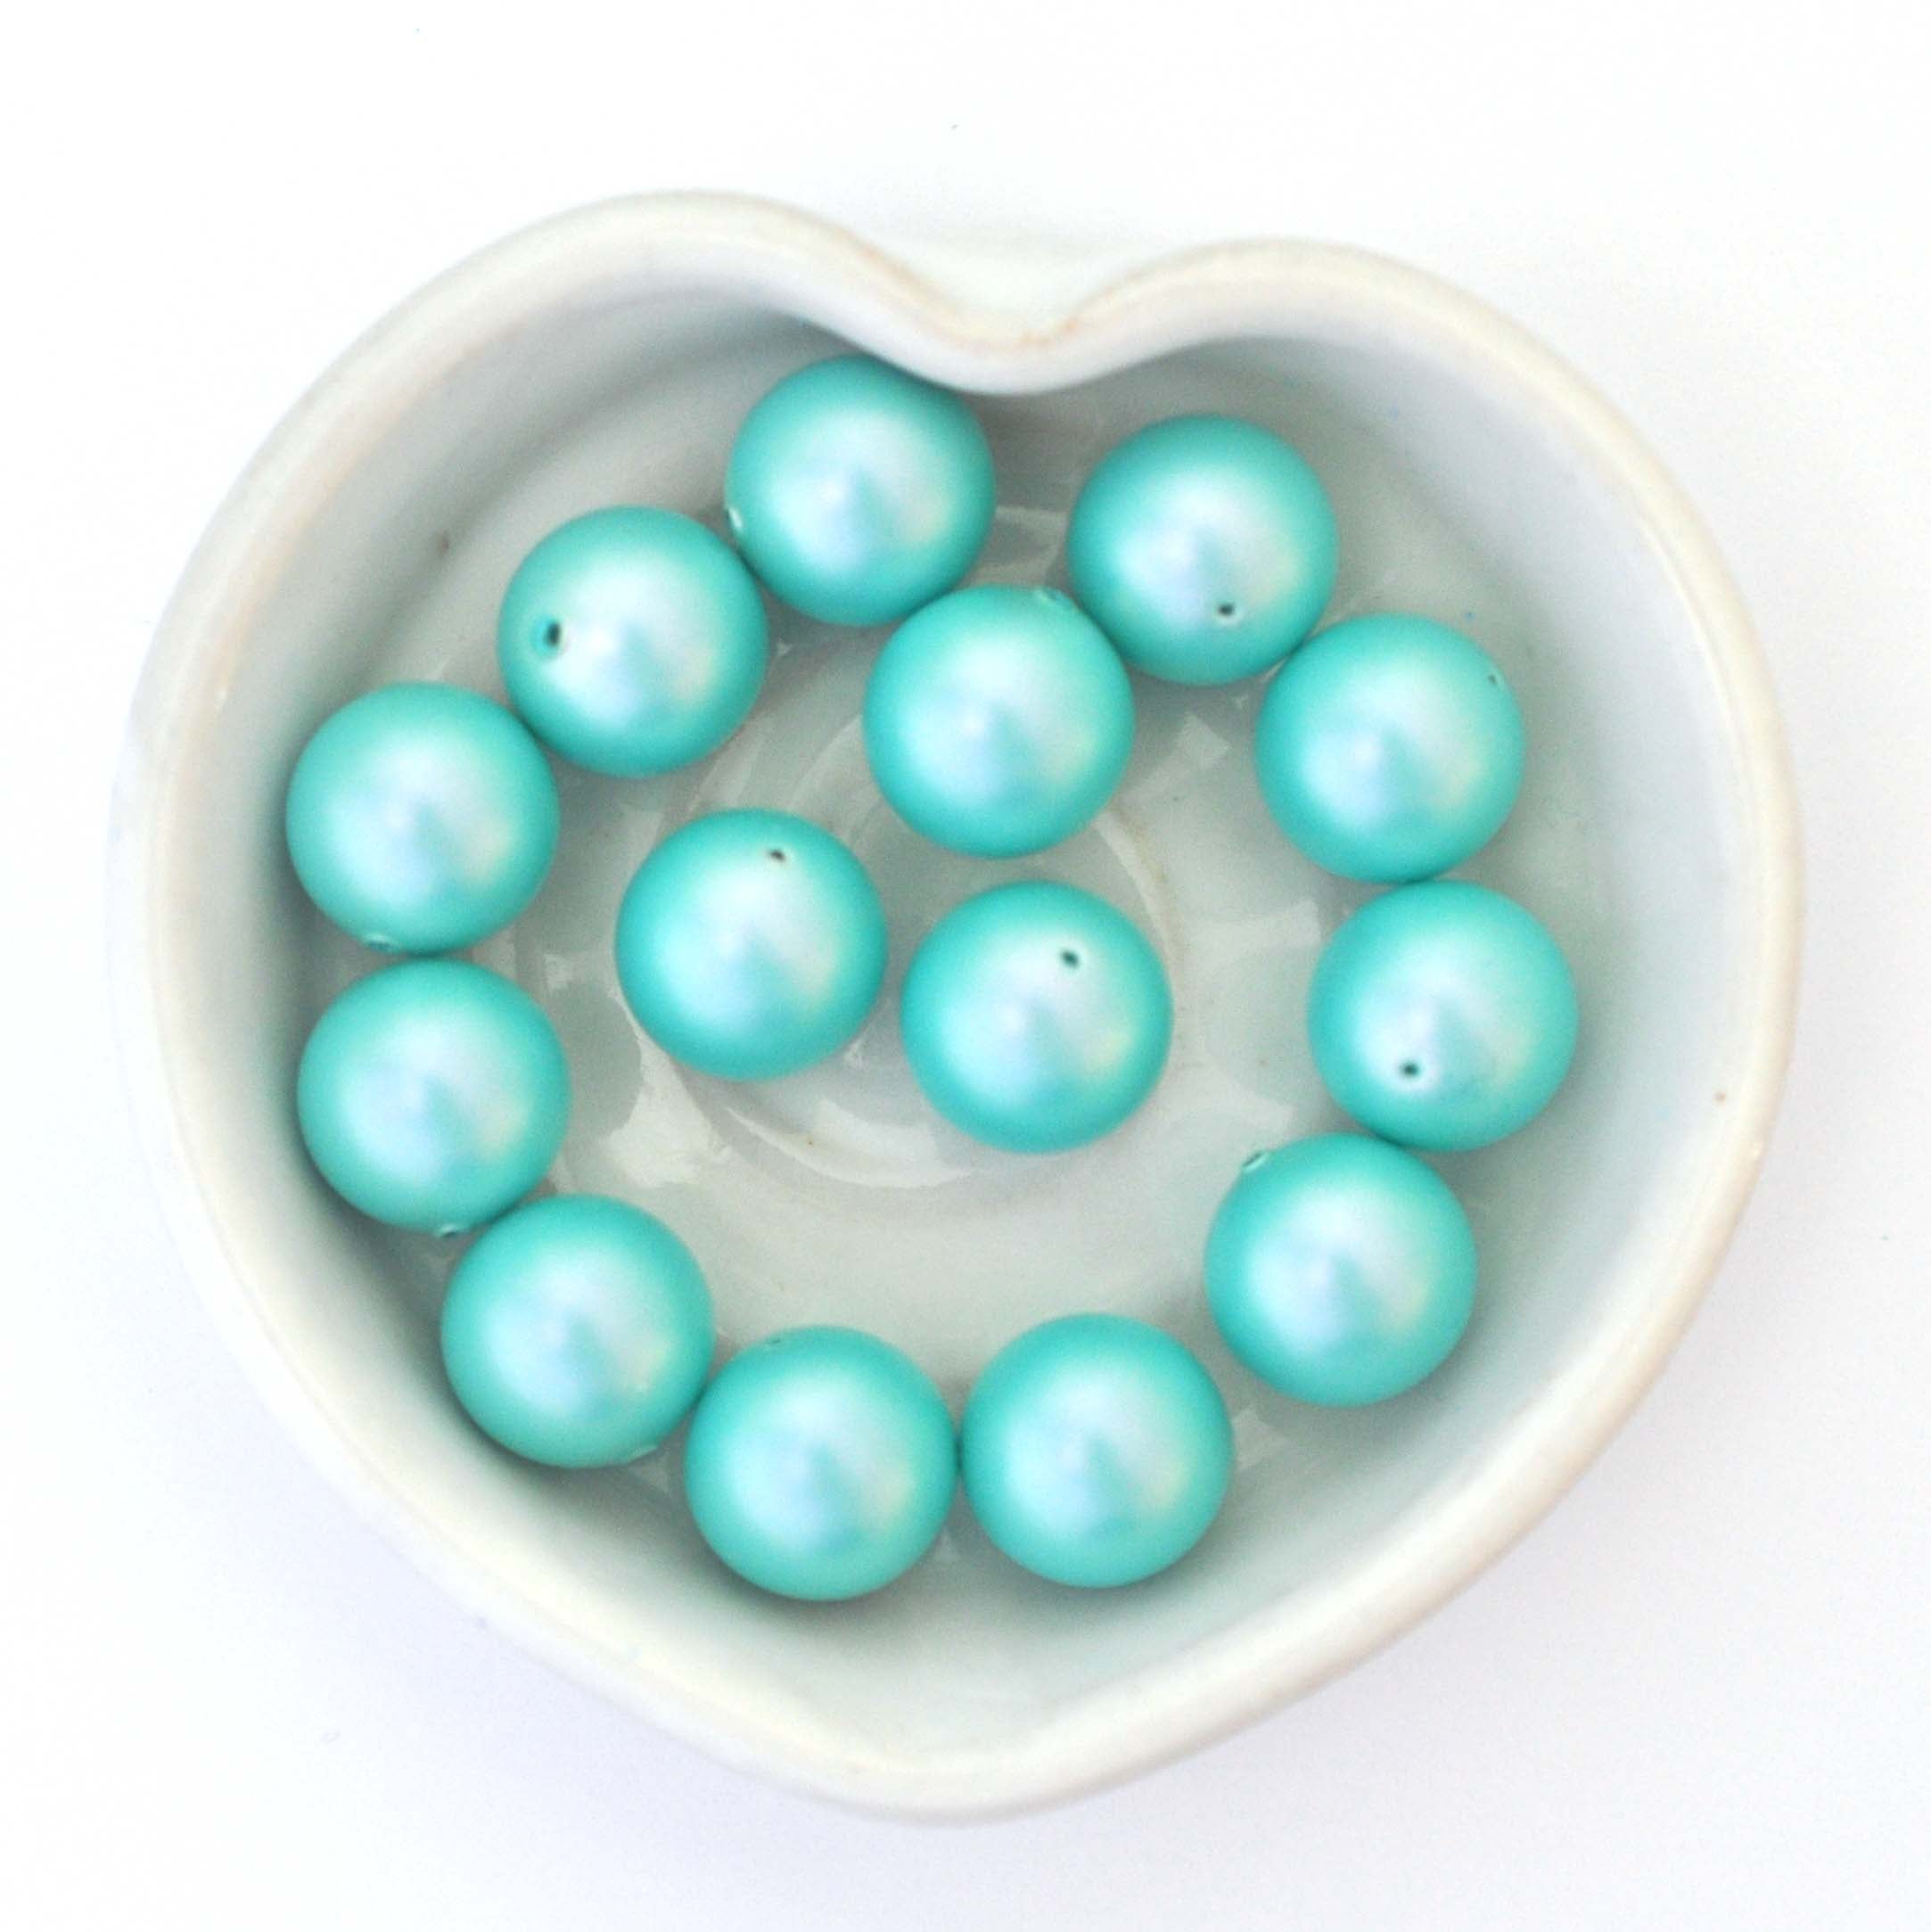 Iridescent Light Turquoise 5810 Barton Crystal Round Pearl Beads 12mm